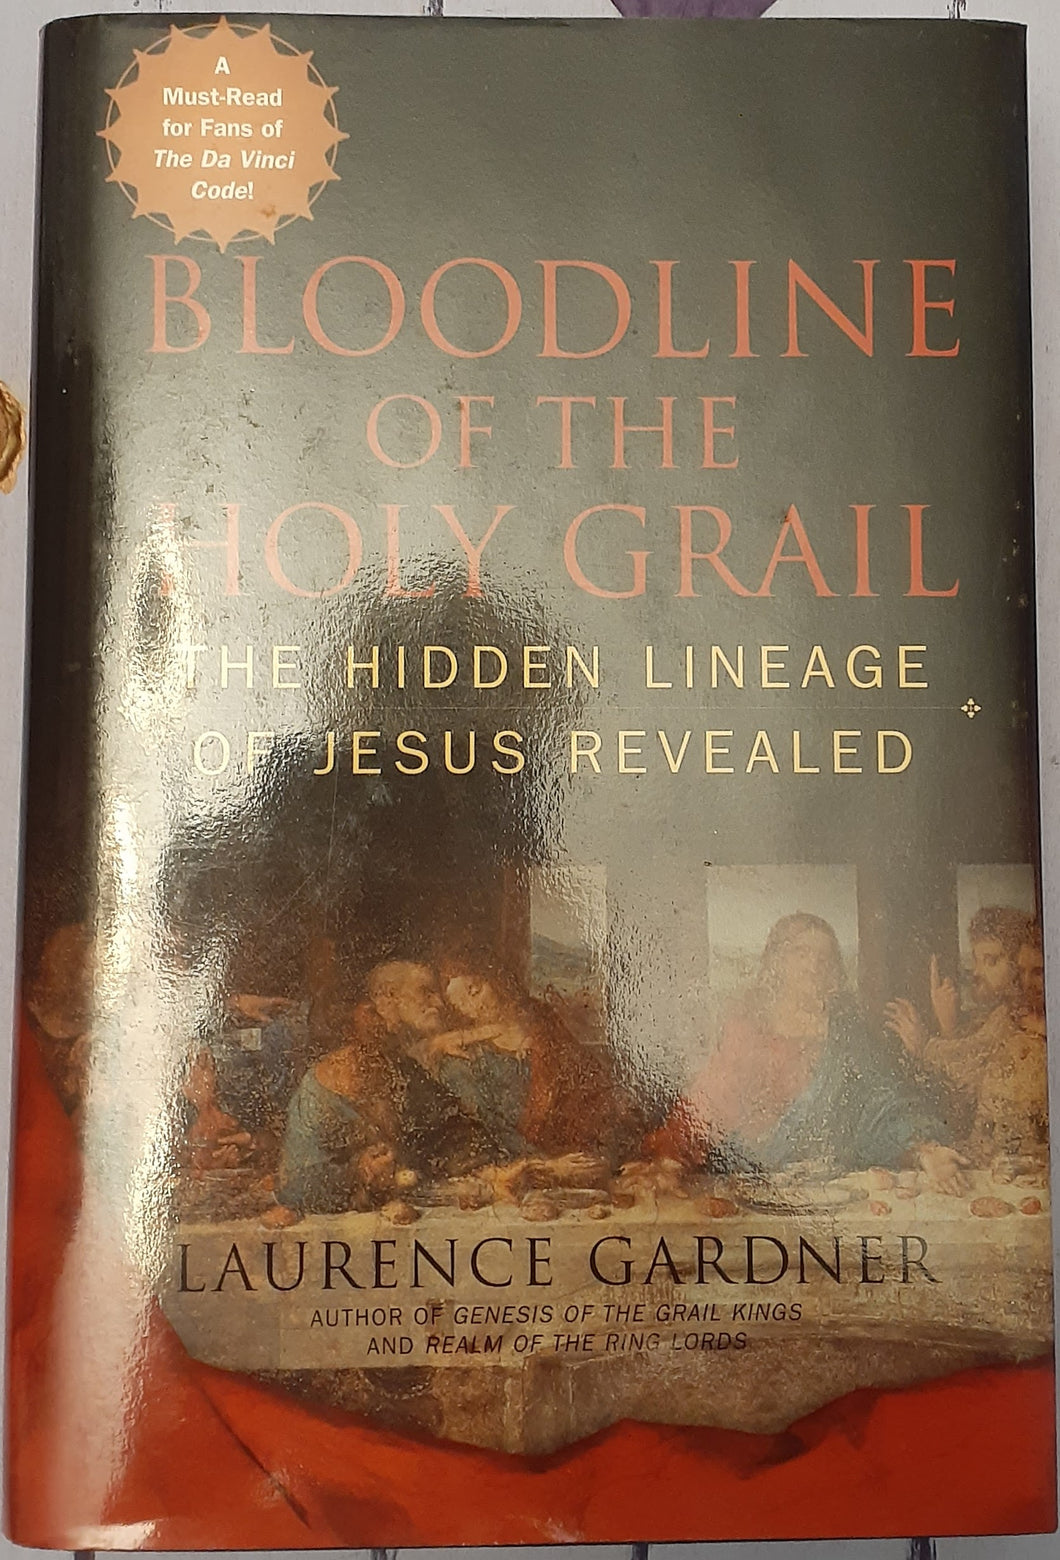 Bloodline of the Holy Grail - The Hidden Lineage of Jesus Revealed